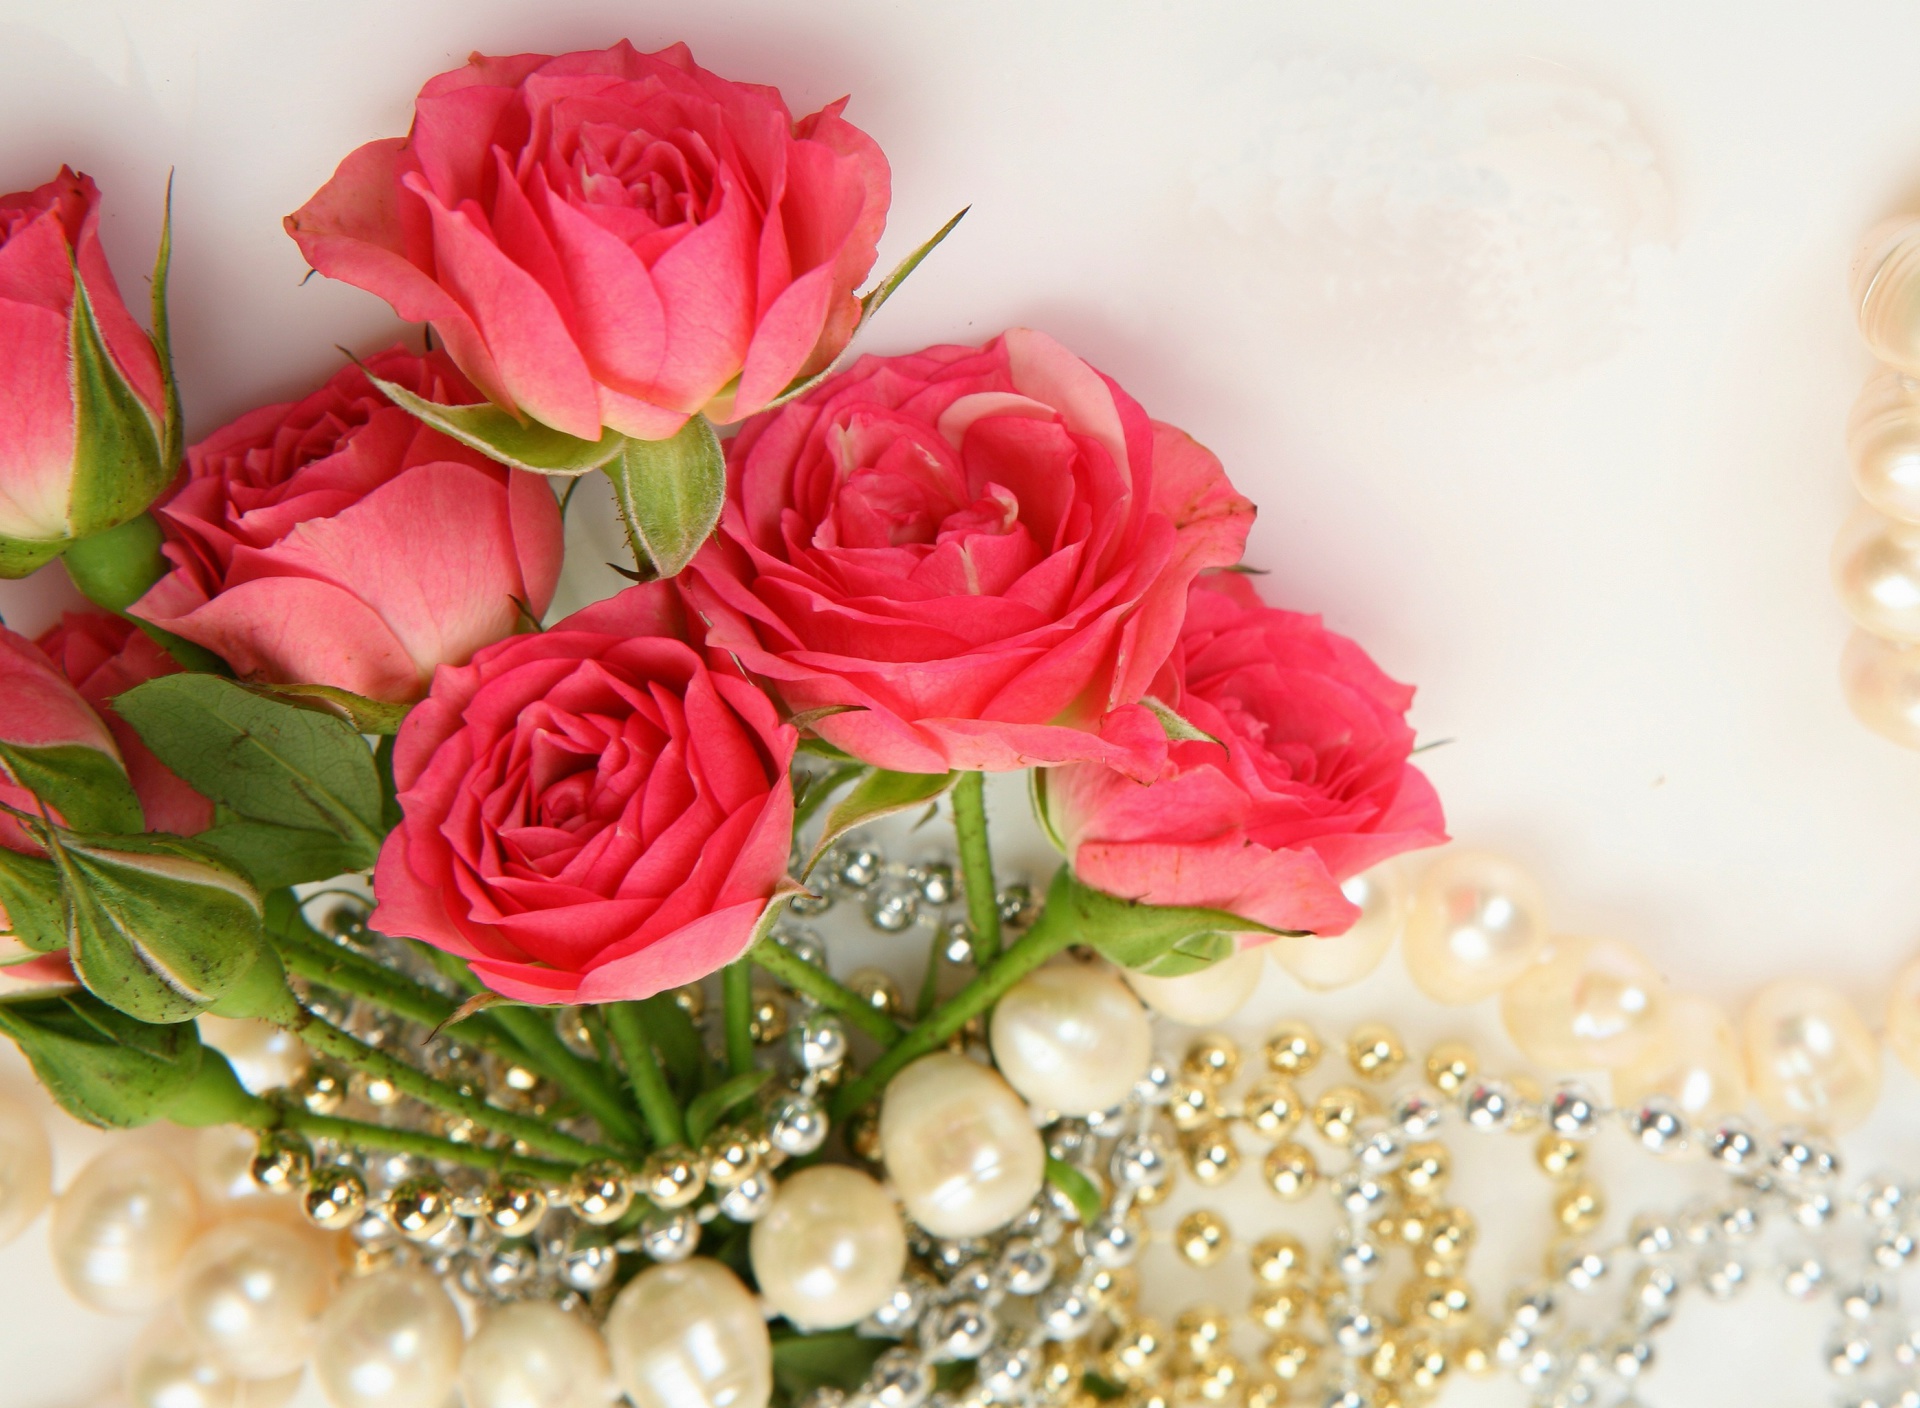 Necklace and Roses Bouquet screenshot #1 1920x1408